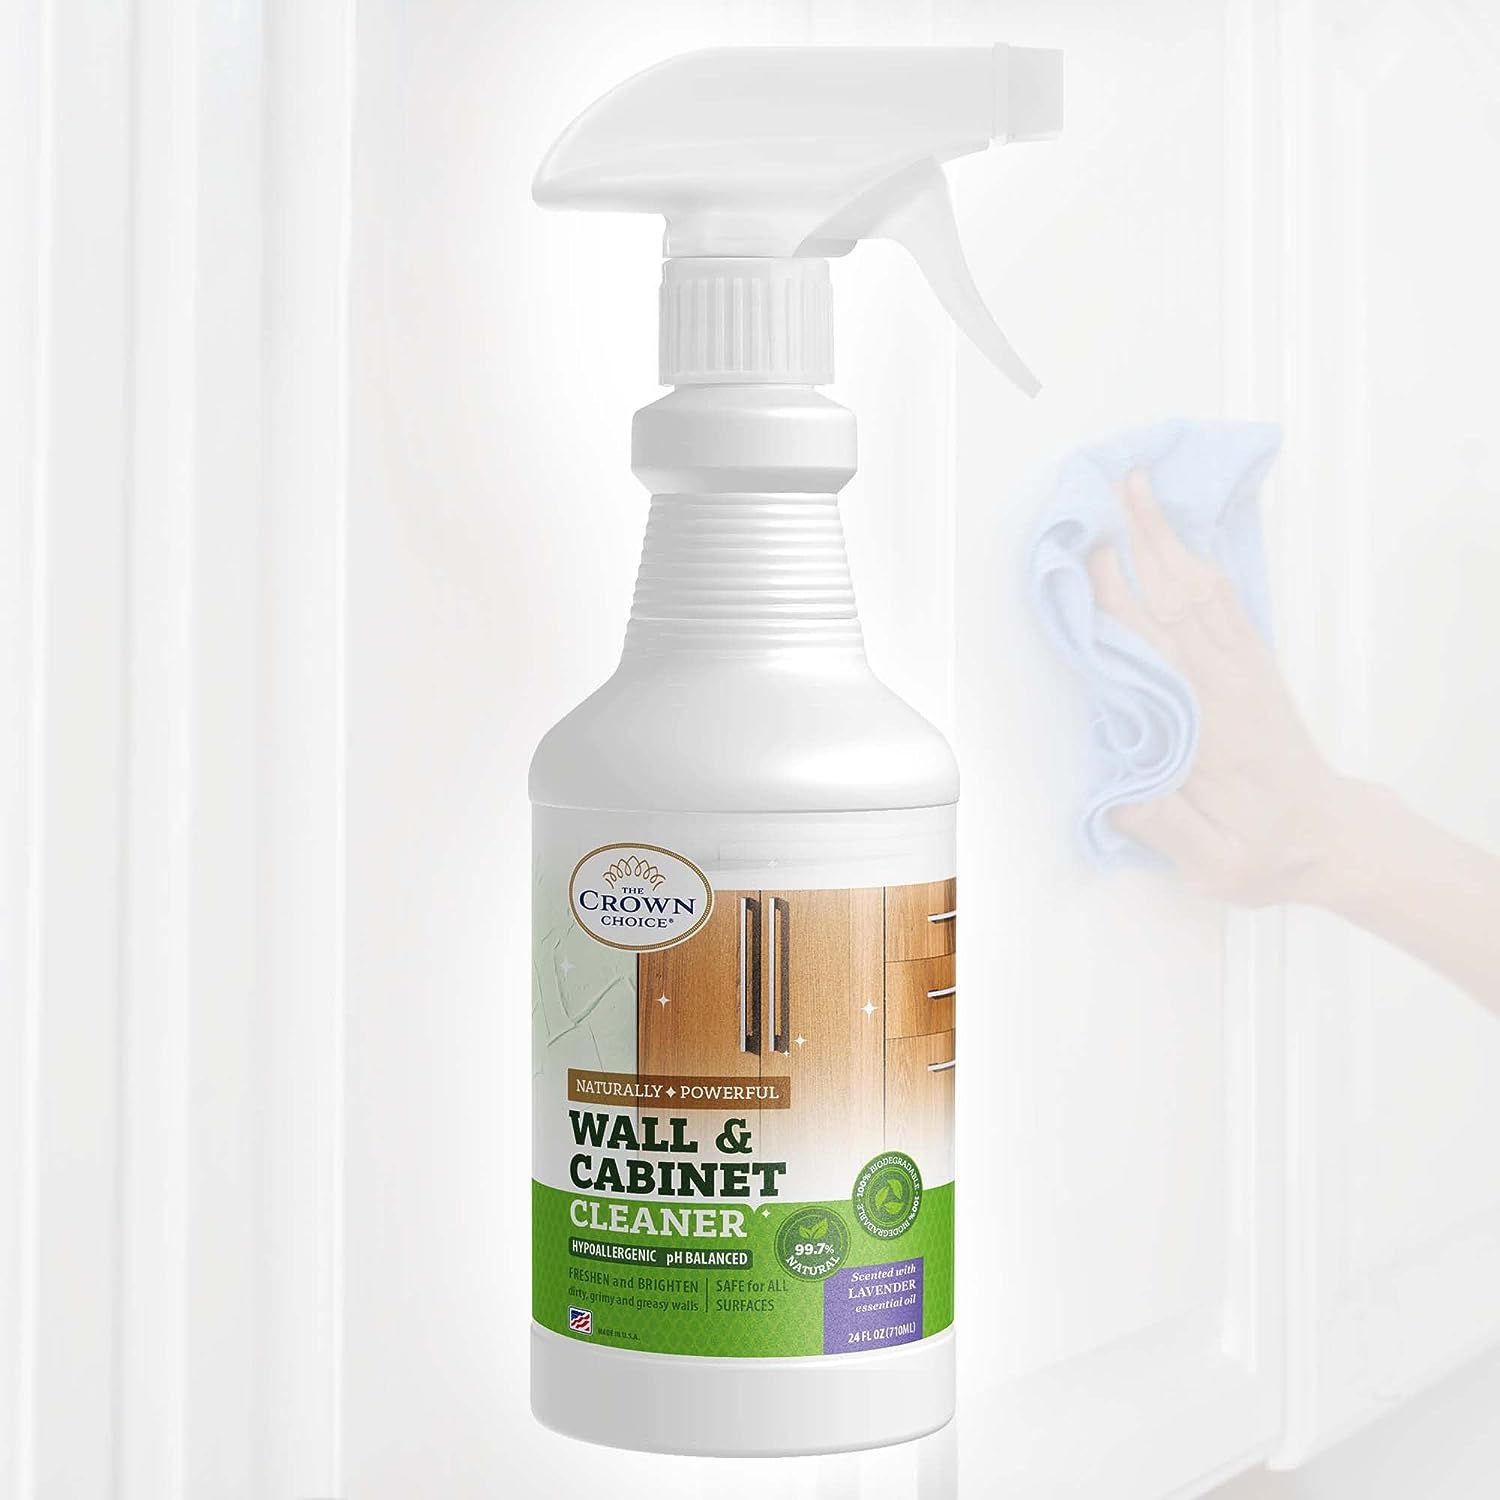 Natural Wall Cleaner for Painted Walls, Ceiling, [...]